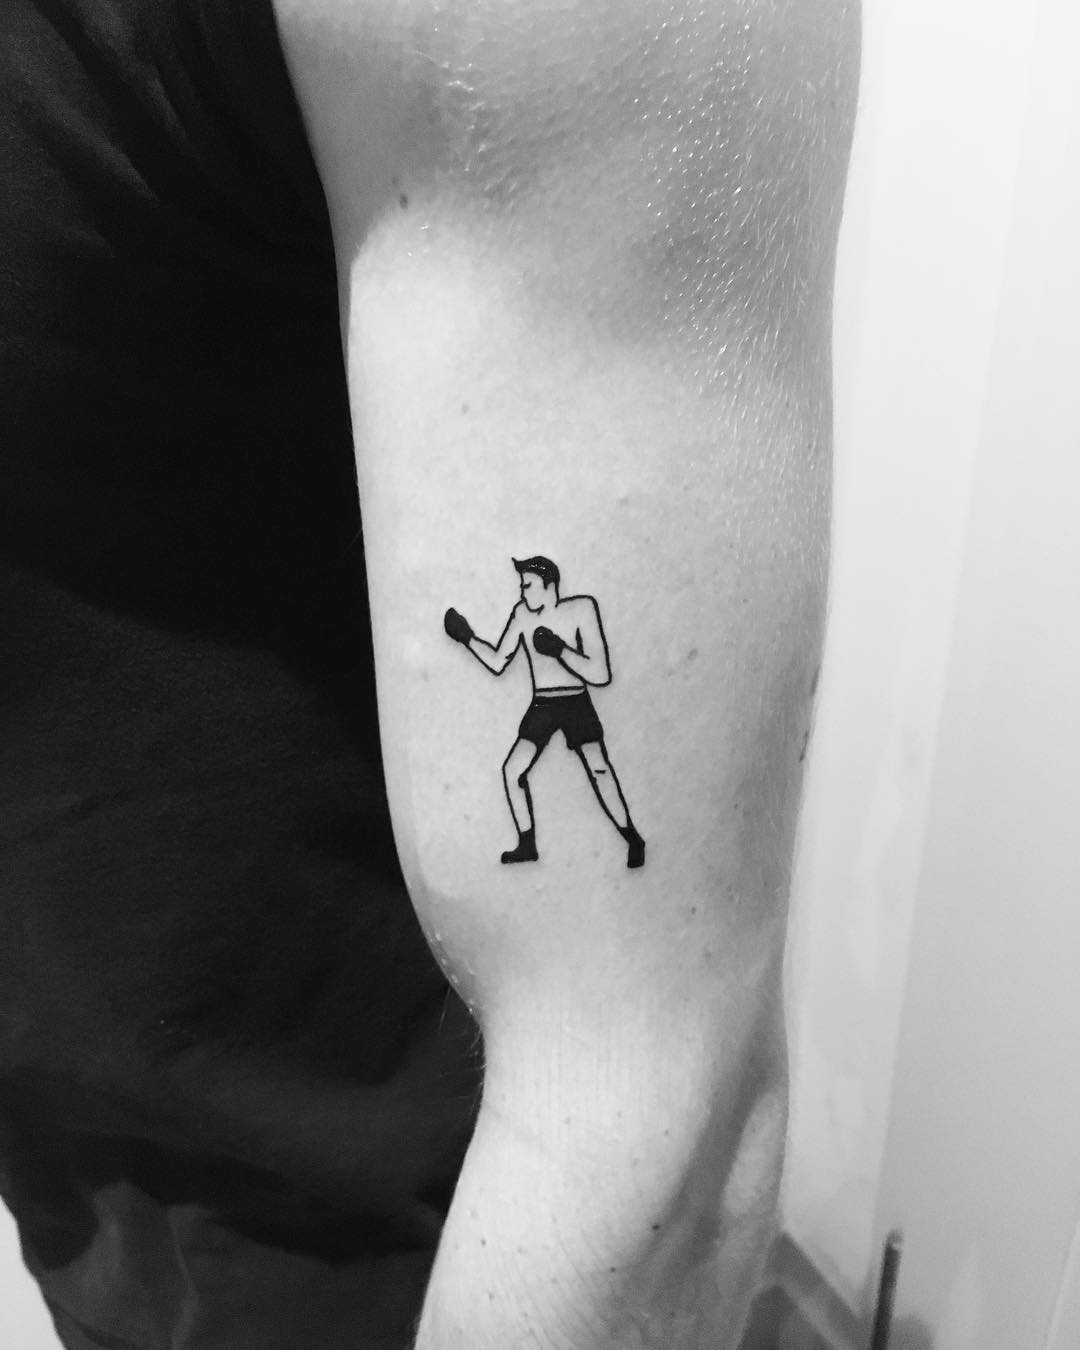 Flash tattoo boxer fighter, player vintage style. - Stock Image - Everypixel